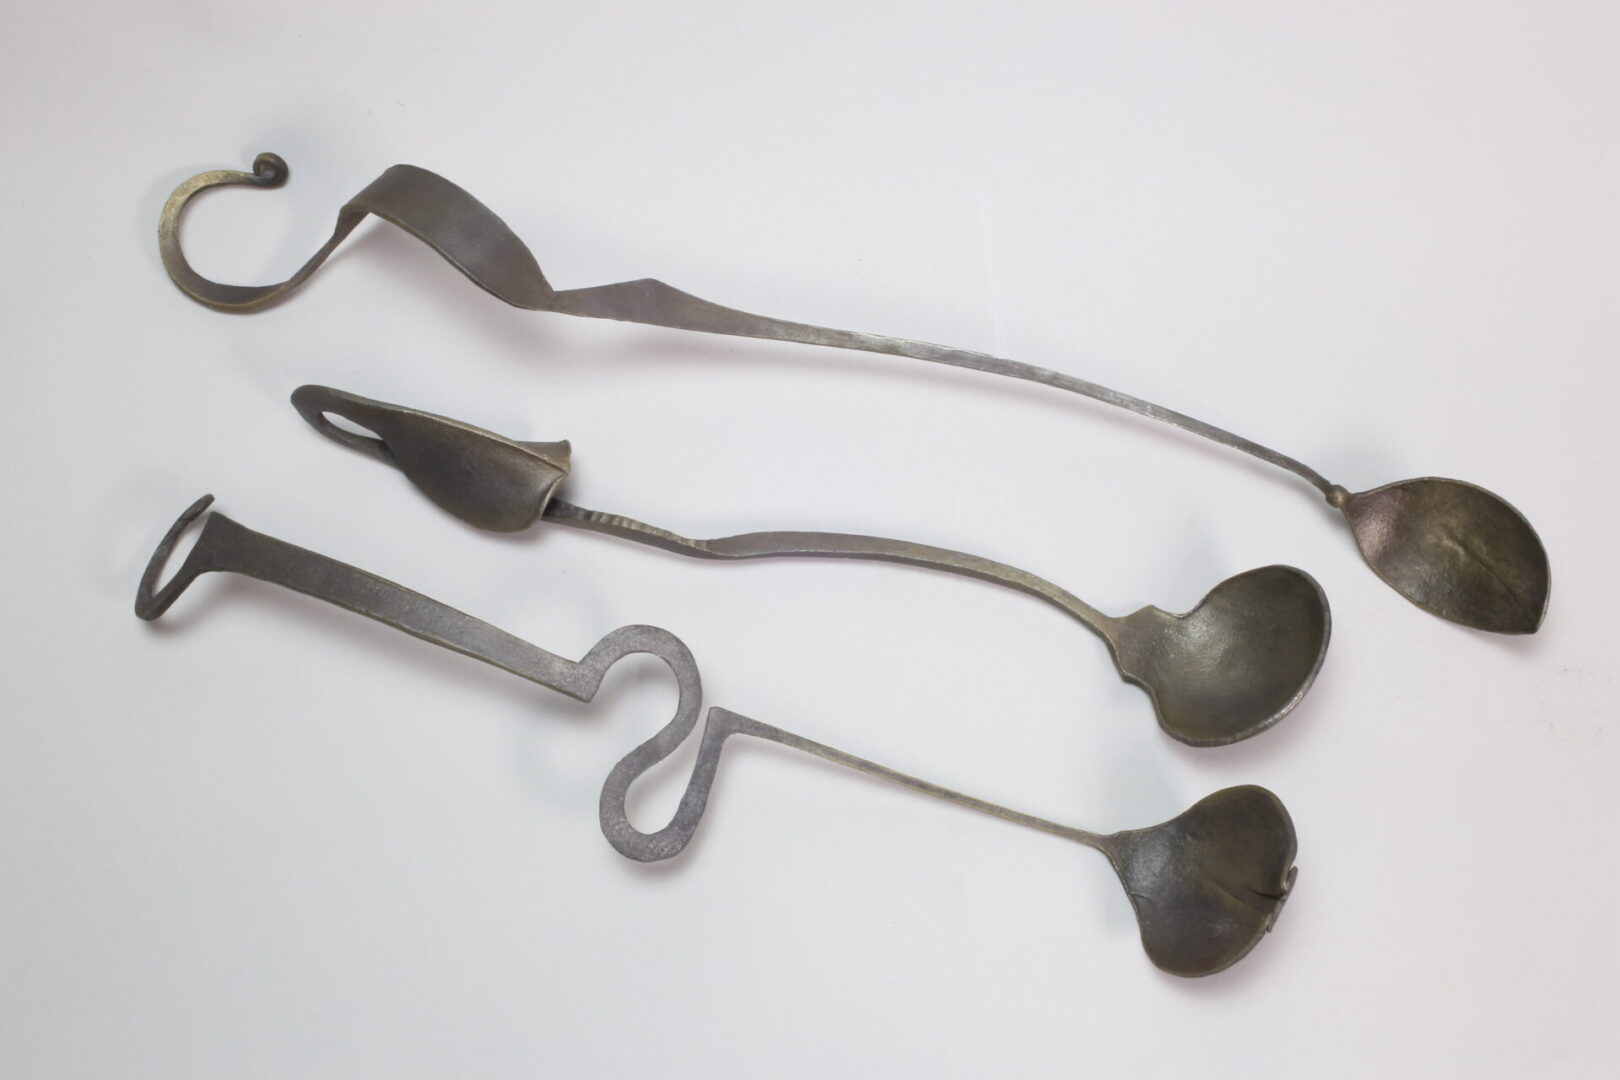 Three metal spoons on a white surface, each crafted by Ira Sherman Jewelry.